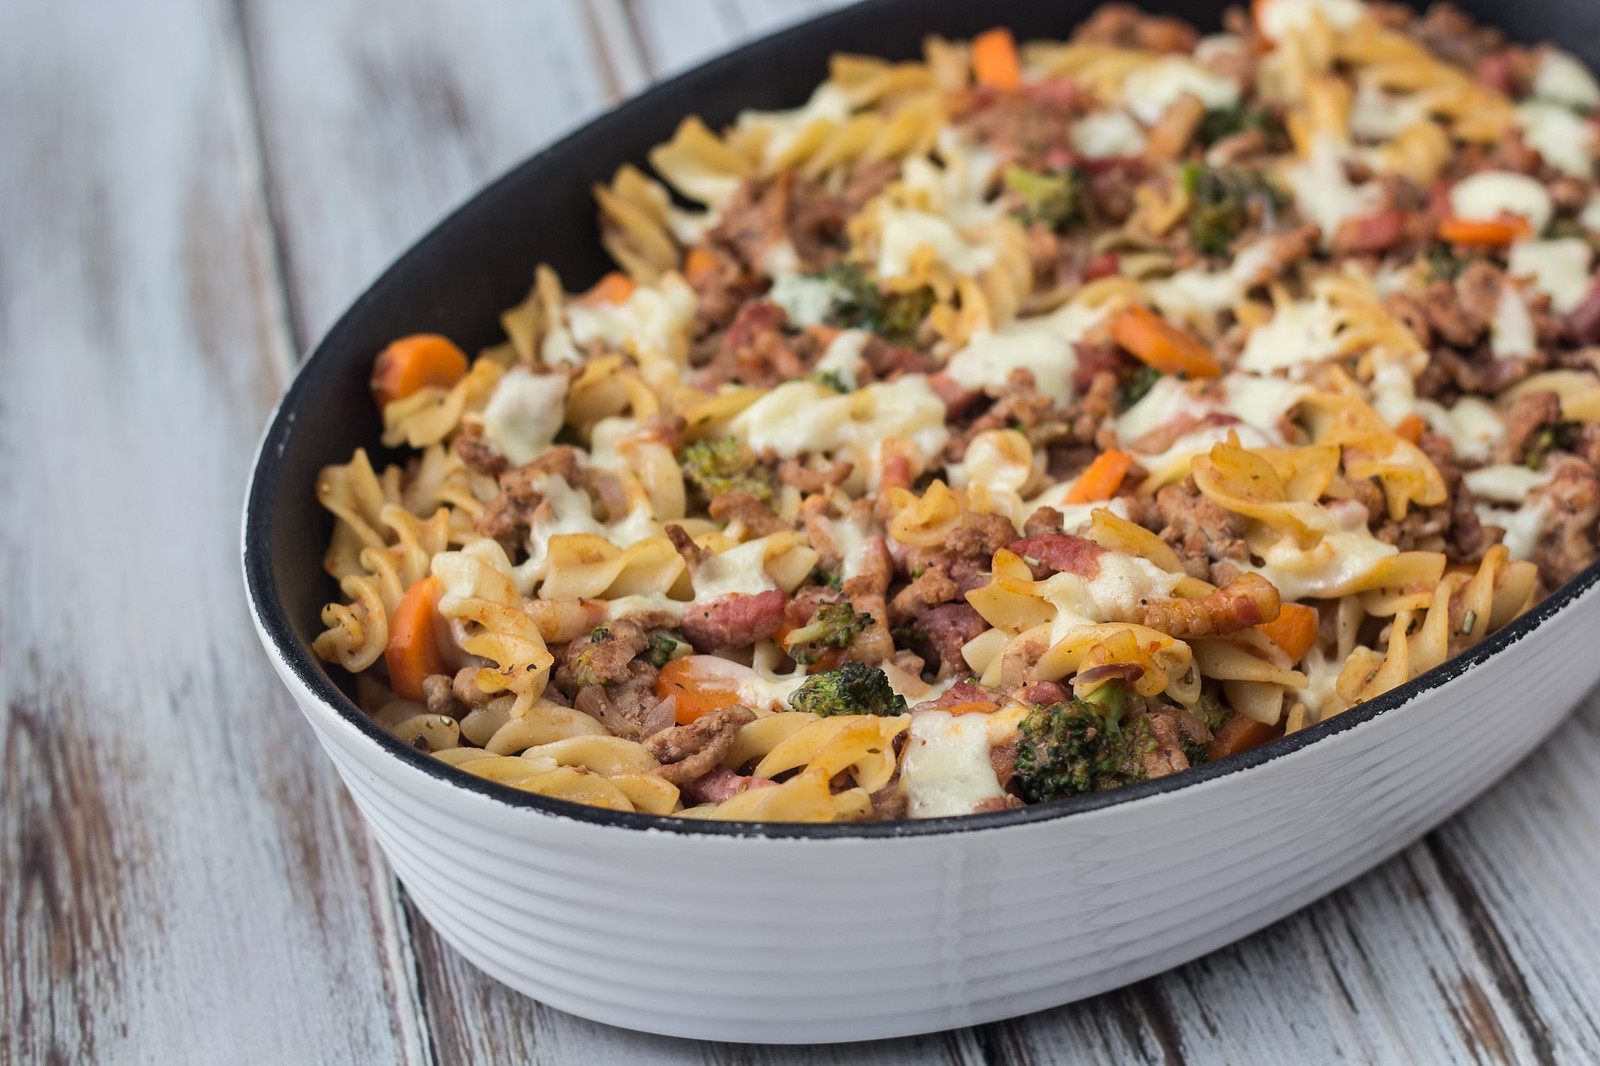 Recipe for a healthy Pork and Bacon Pasta dish